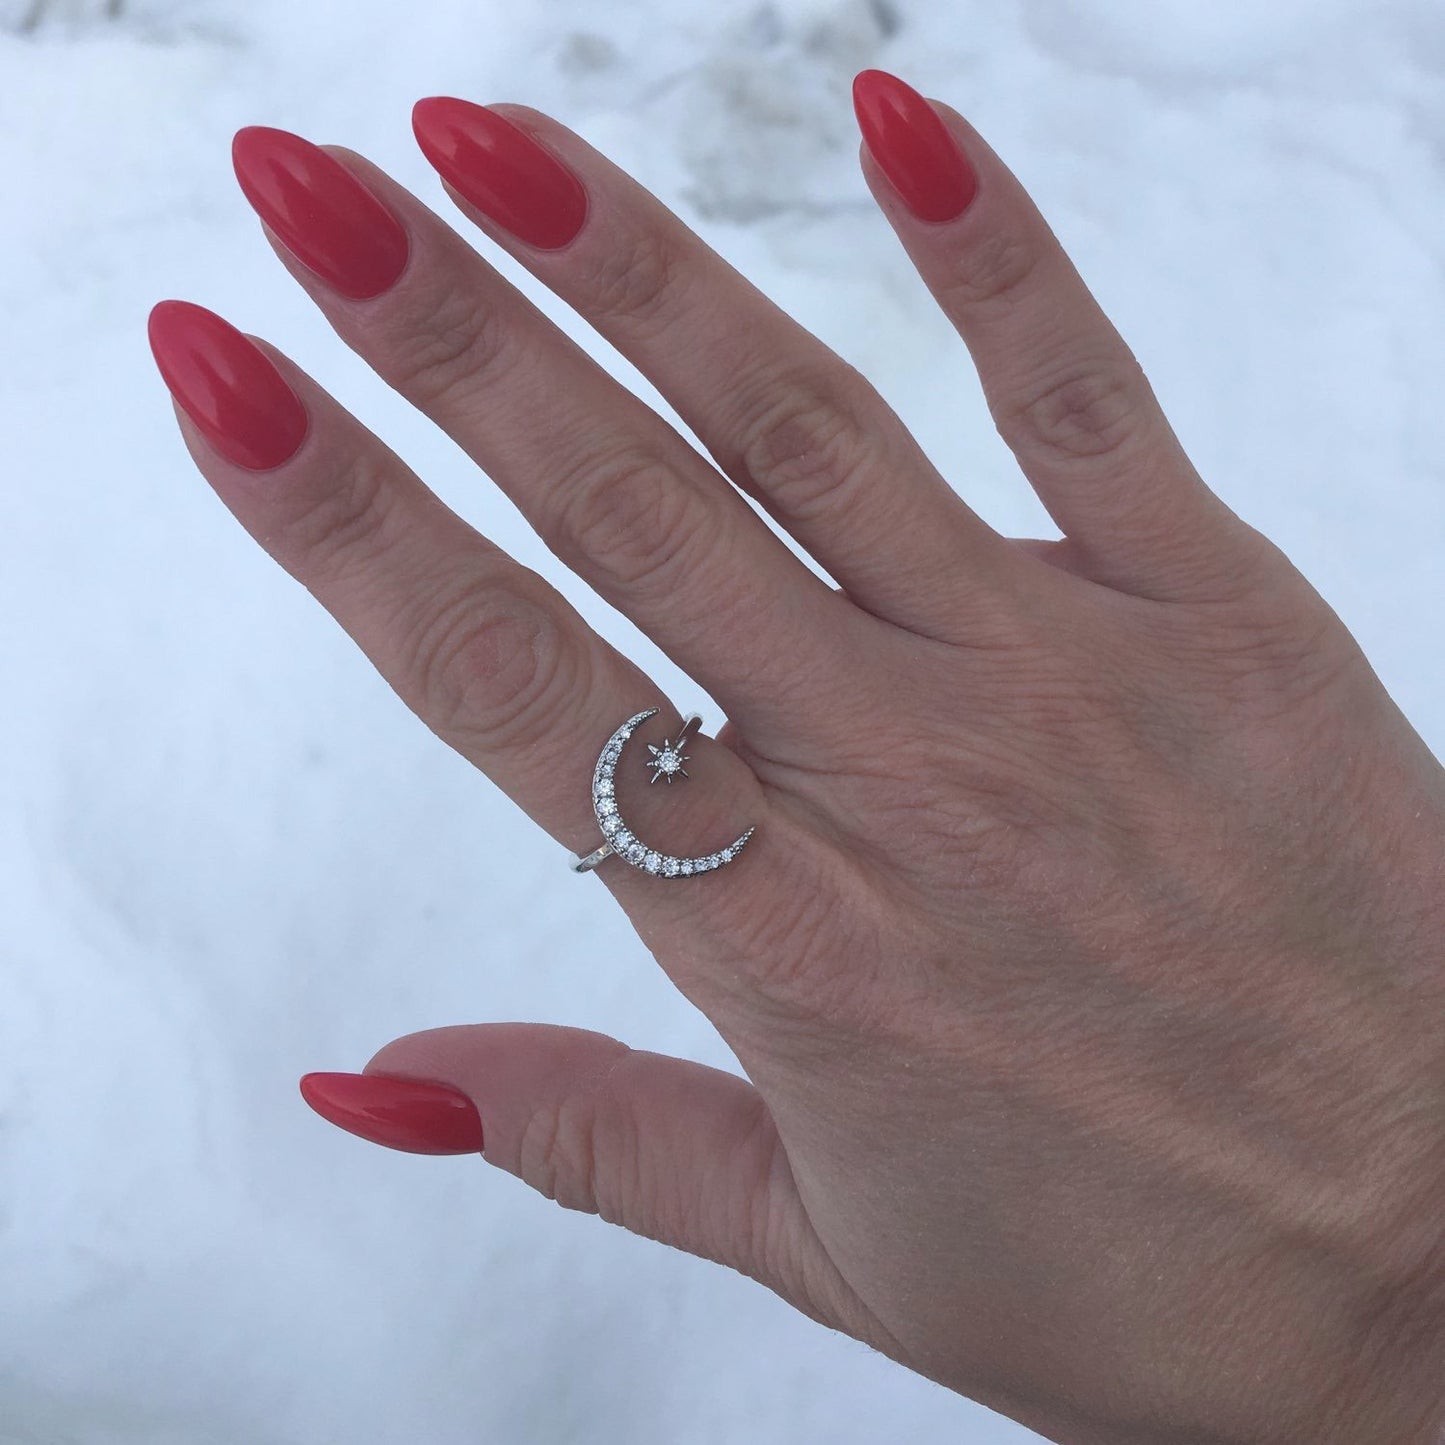 Star Crescent Moon Ring in silver being modeled on a woman's hand with red nail polish.